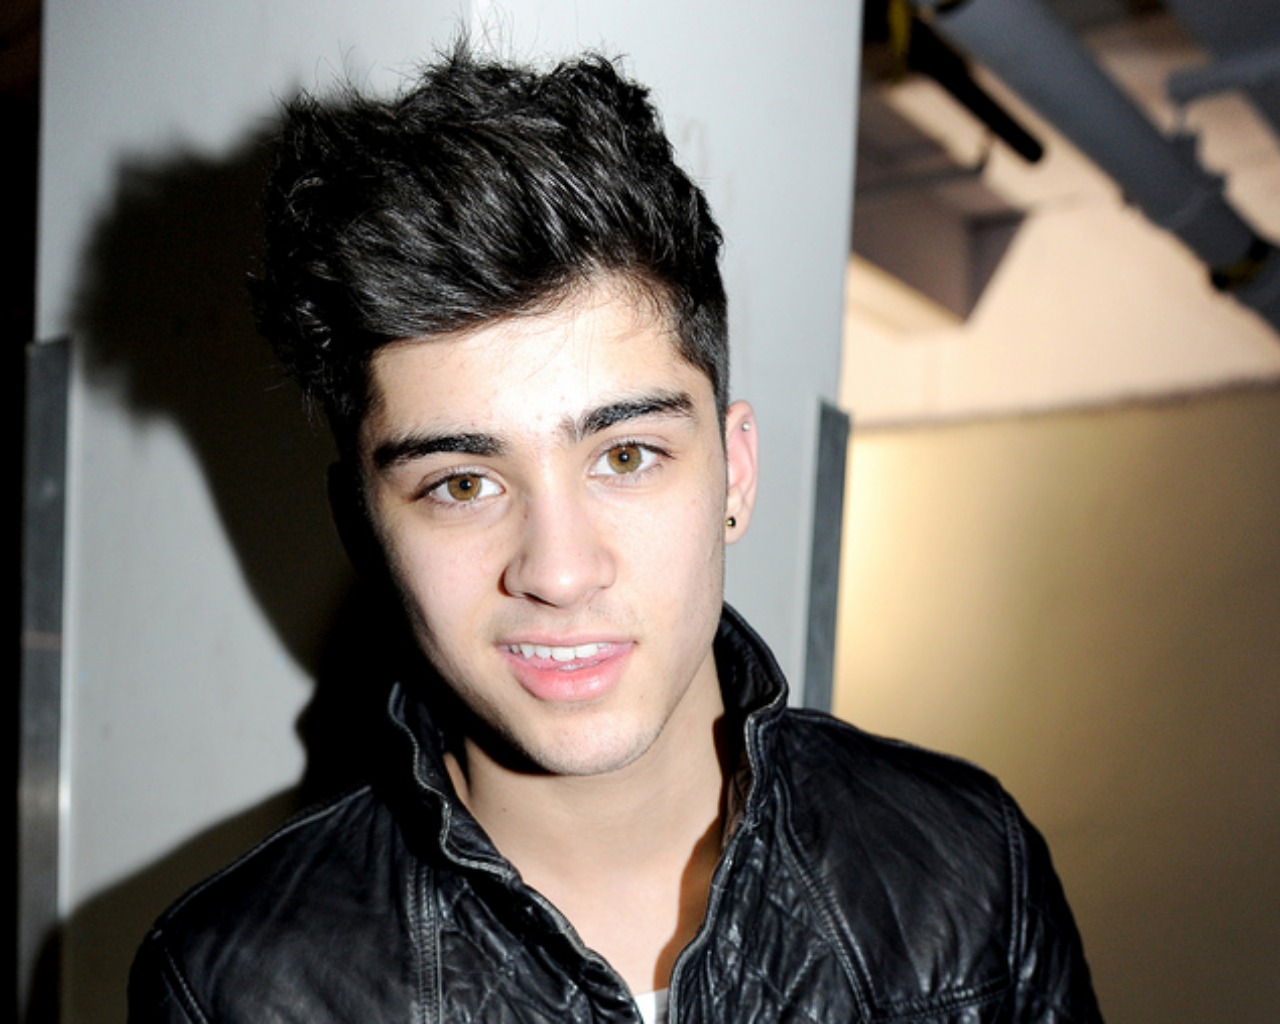  Zayn malik hd backgrounds wallpaper and make this wallpaper for your